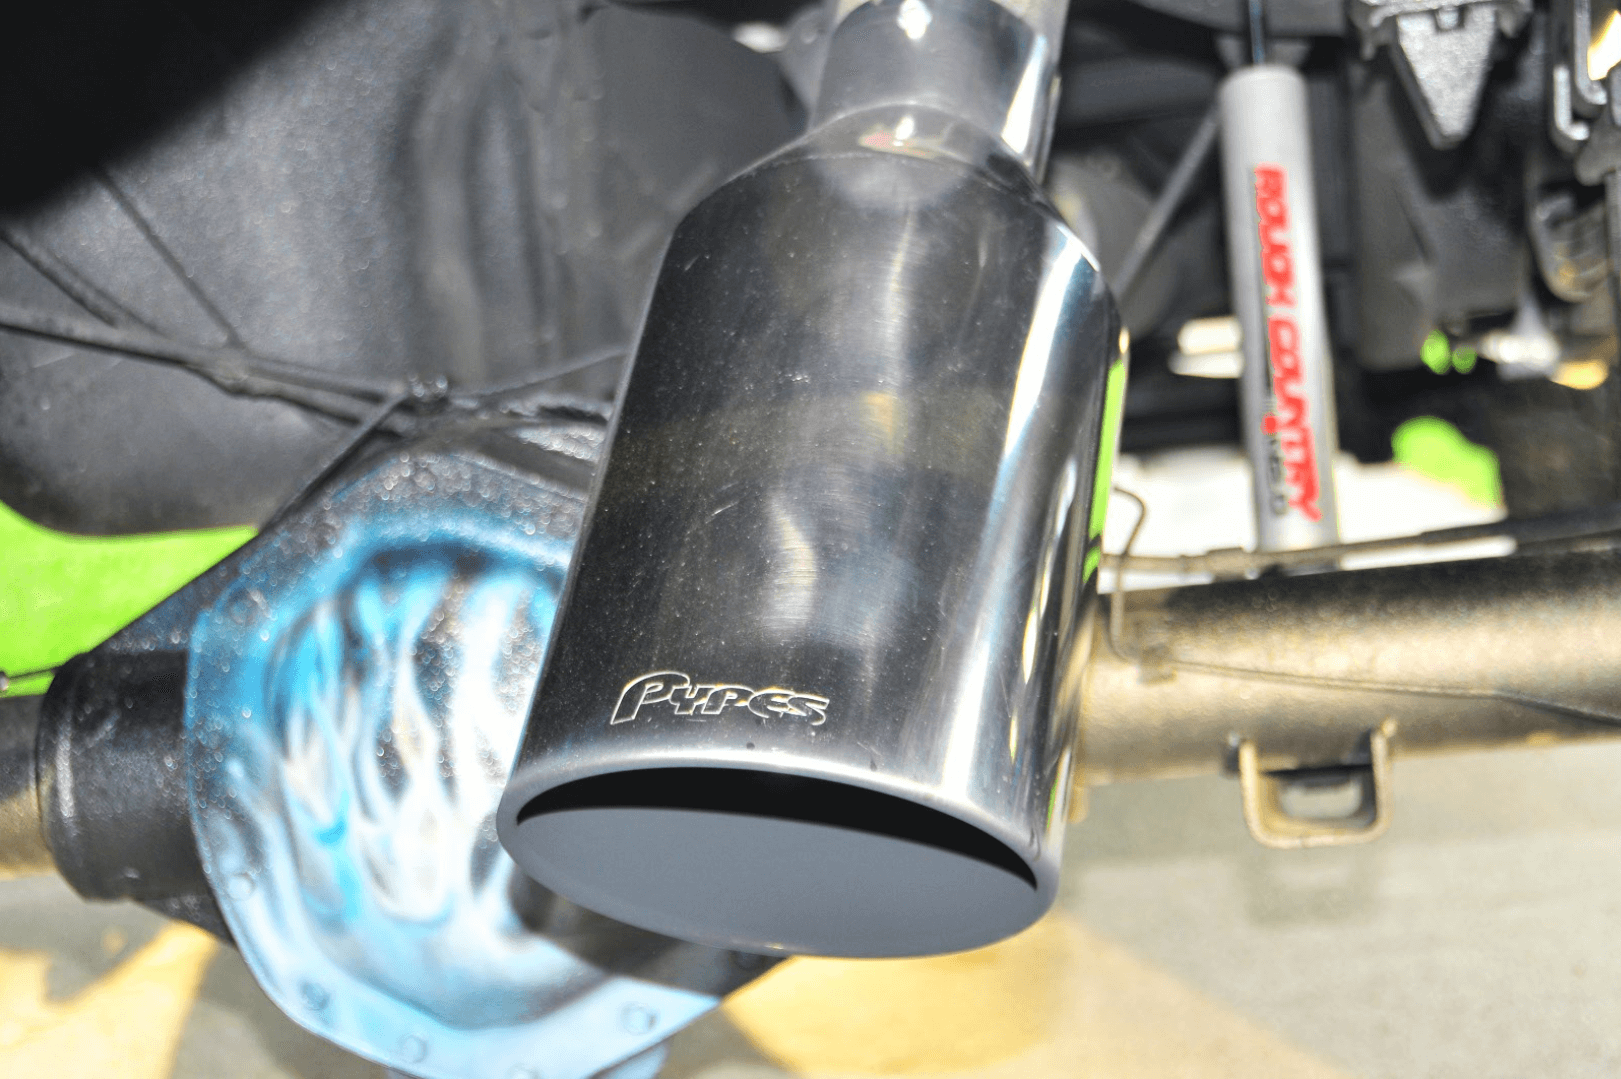 The Pypes tip is a center dump. It’s connected to a 4-in. exhaust system and AFE muffler.